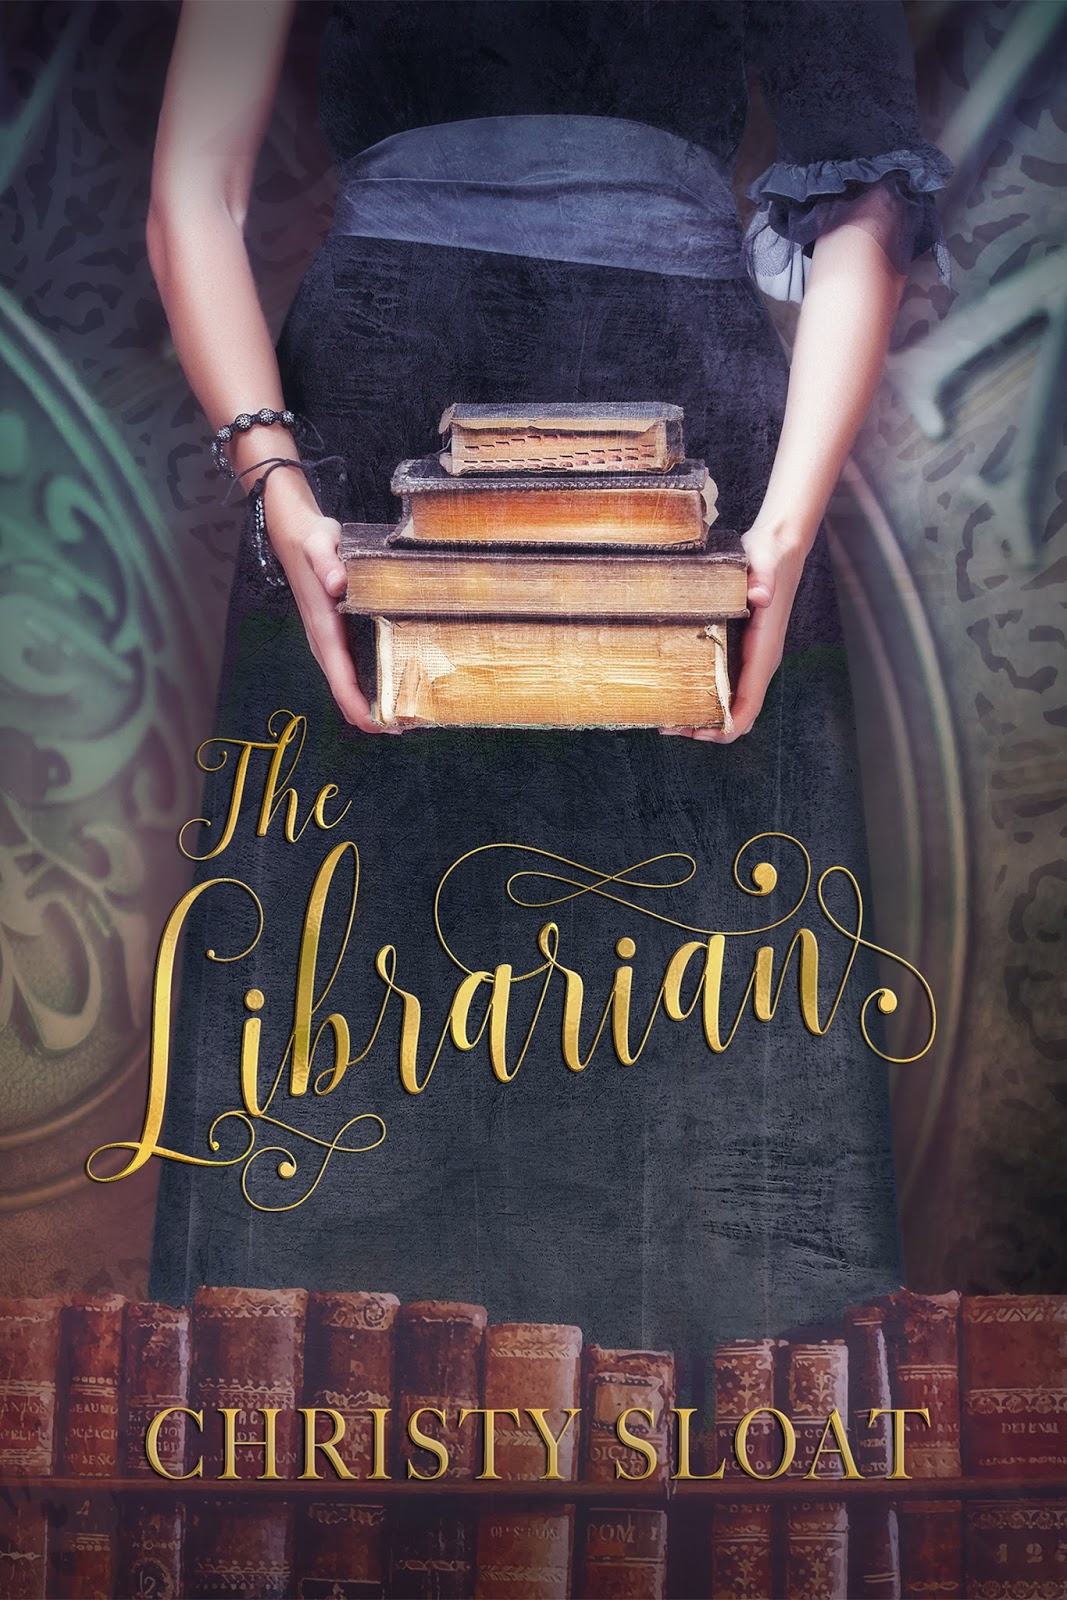 book review the librarianist